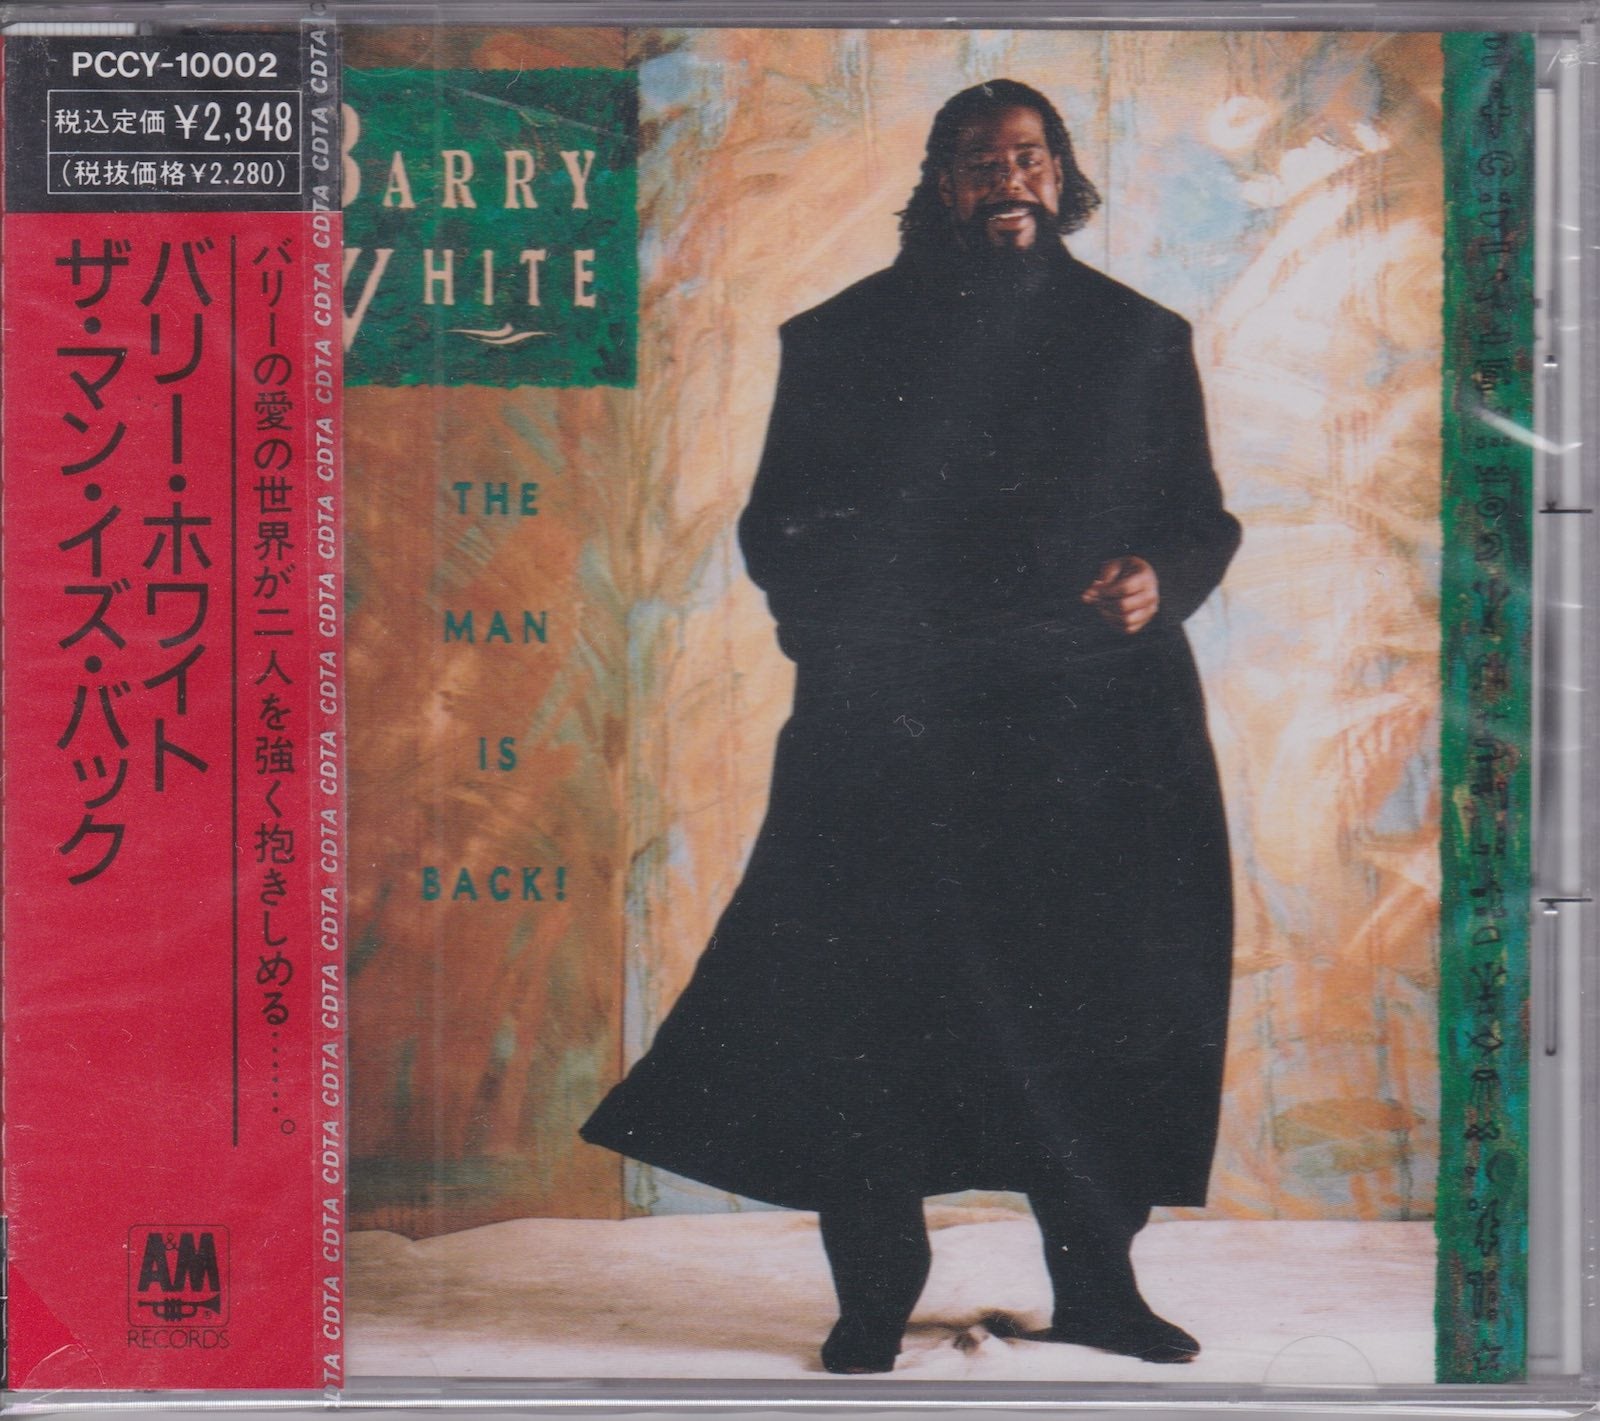 Barry White ‎– The Man Is Back!